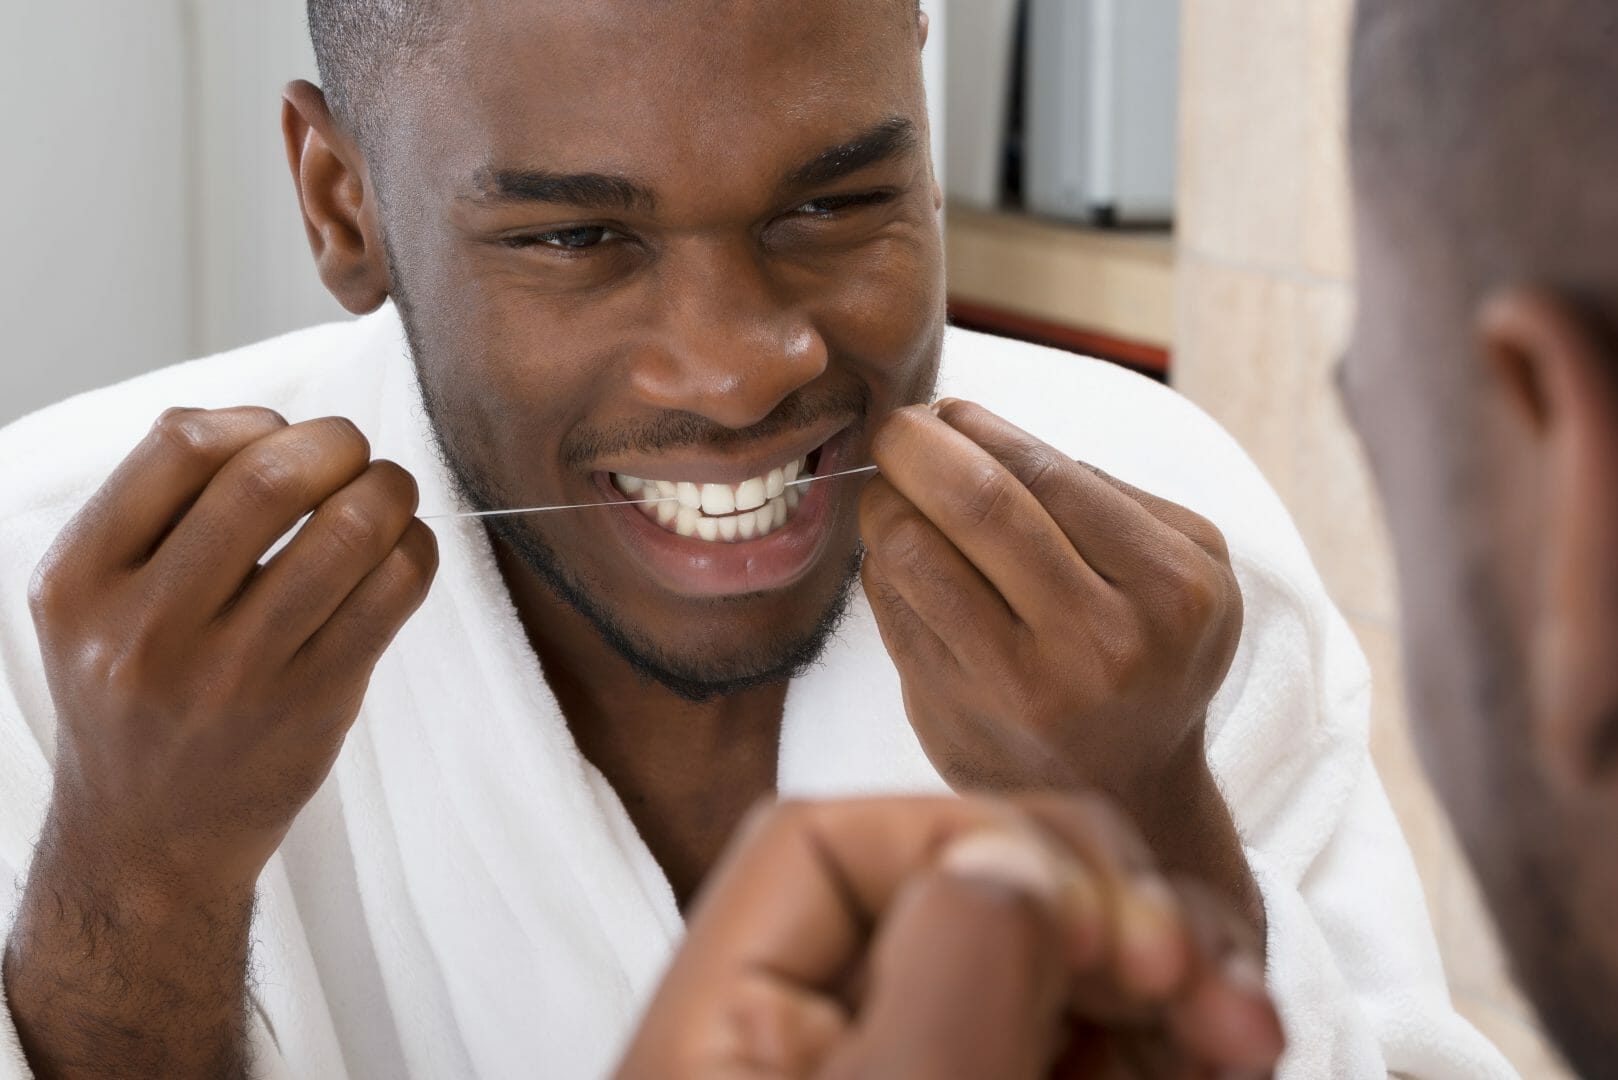 5 Tips on Making Flossing part of your Daily Dental Routine